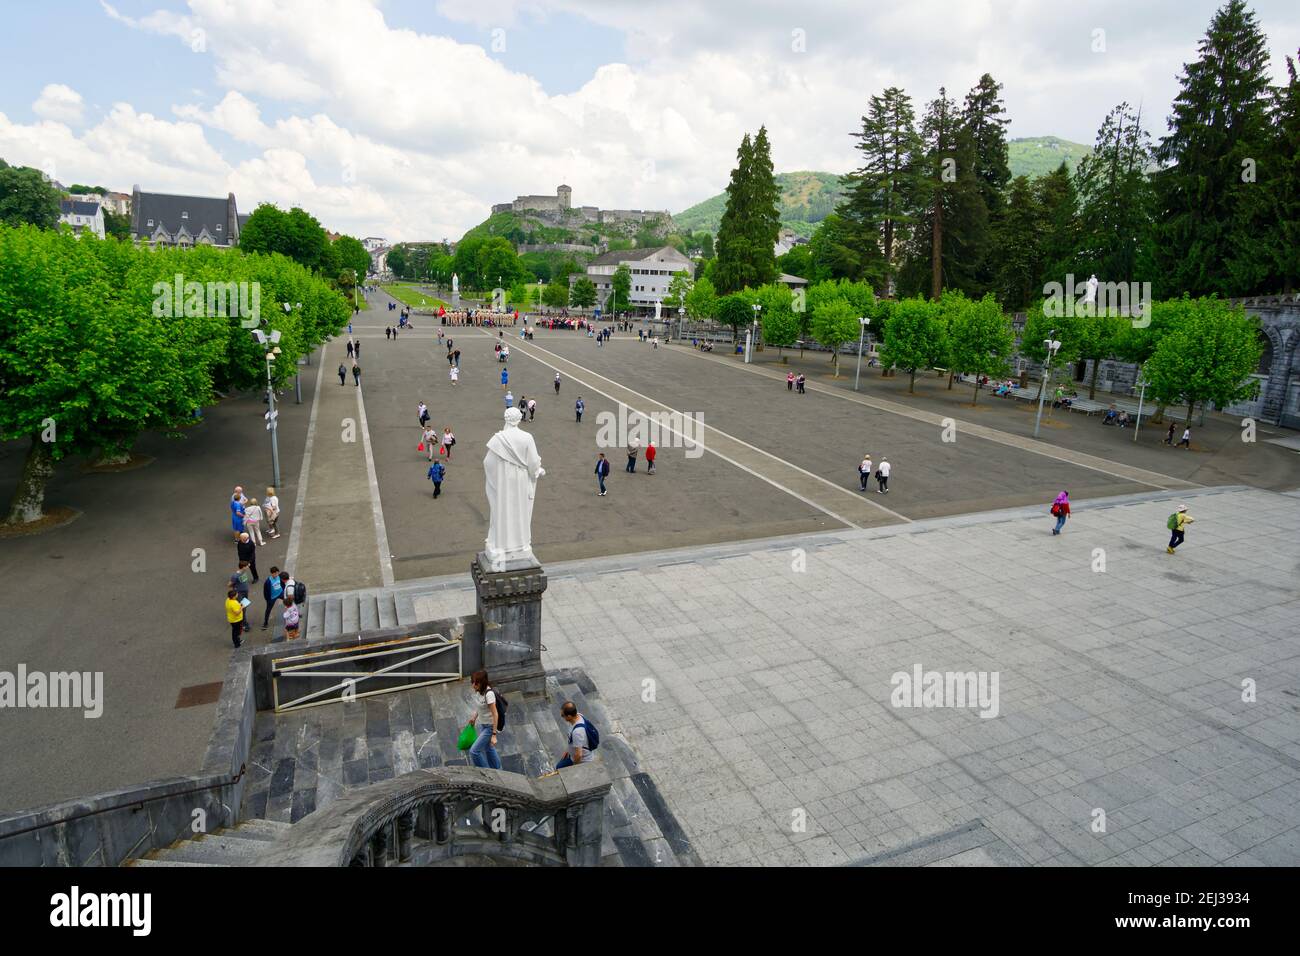 Lourdes, France - 05 2018. Esplanade of the sanctuary of Lourdes with the medieval castle in the background. Stock Photo